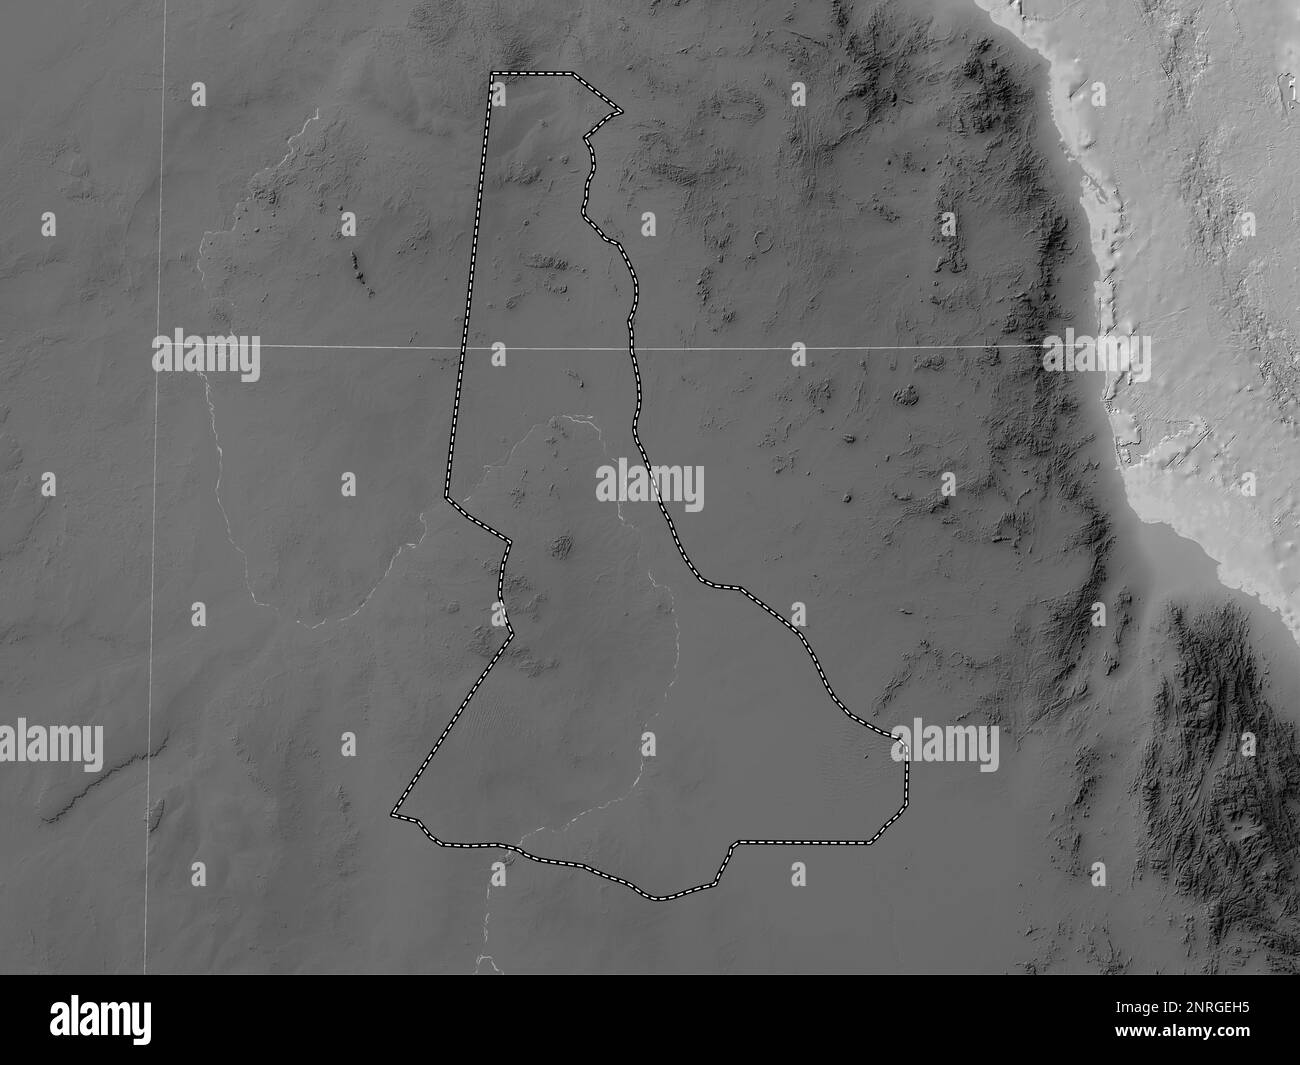 River Nile, state of Sudan. Grayscale elevation map with lakes and rivers Stock Photo